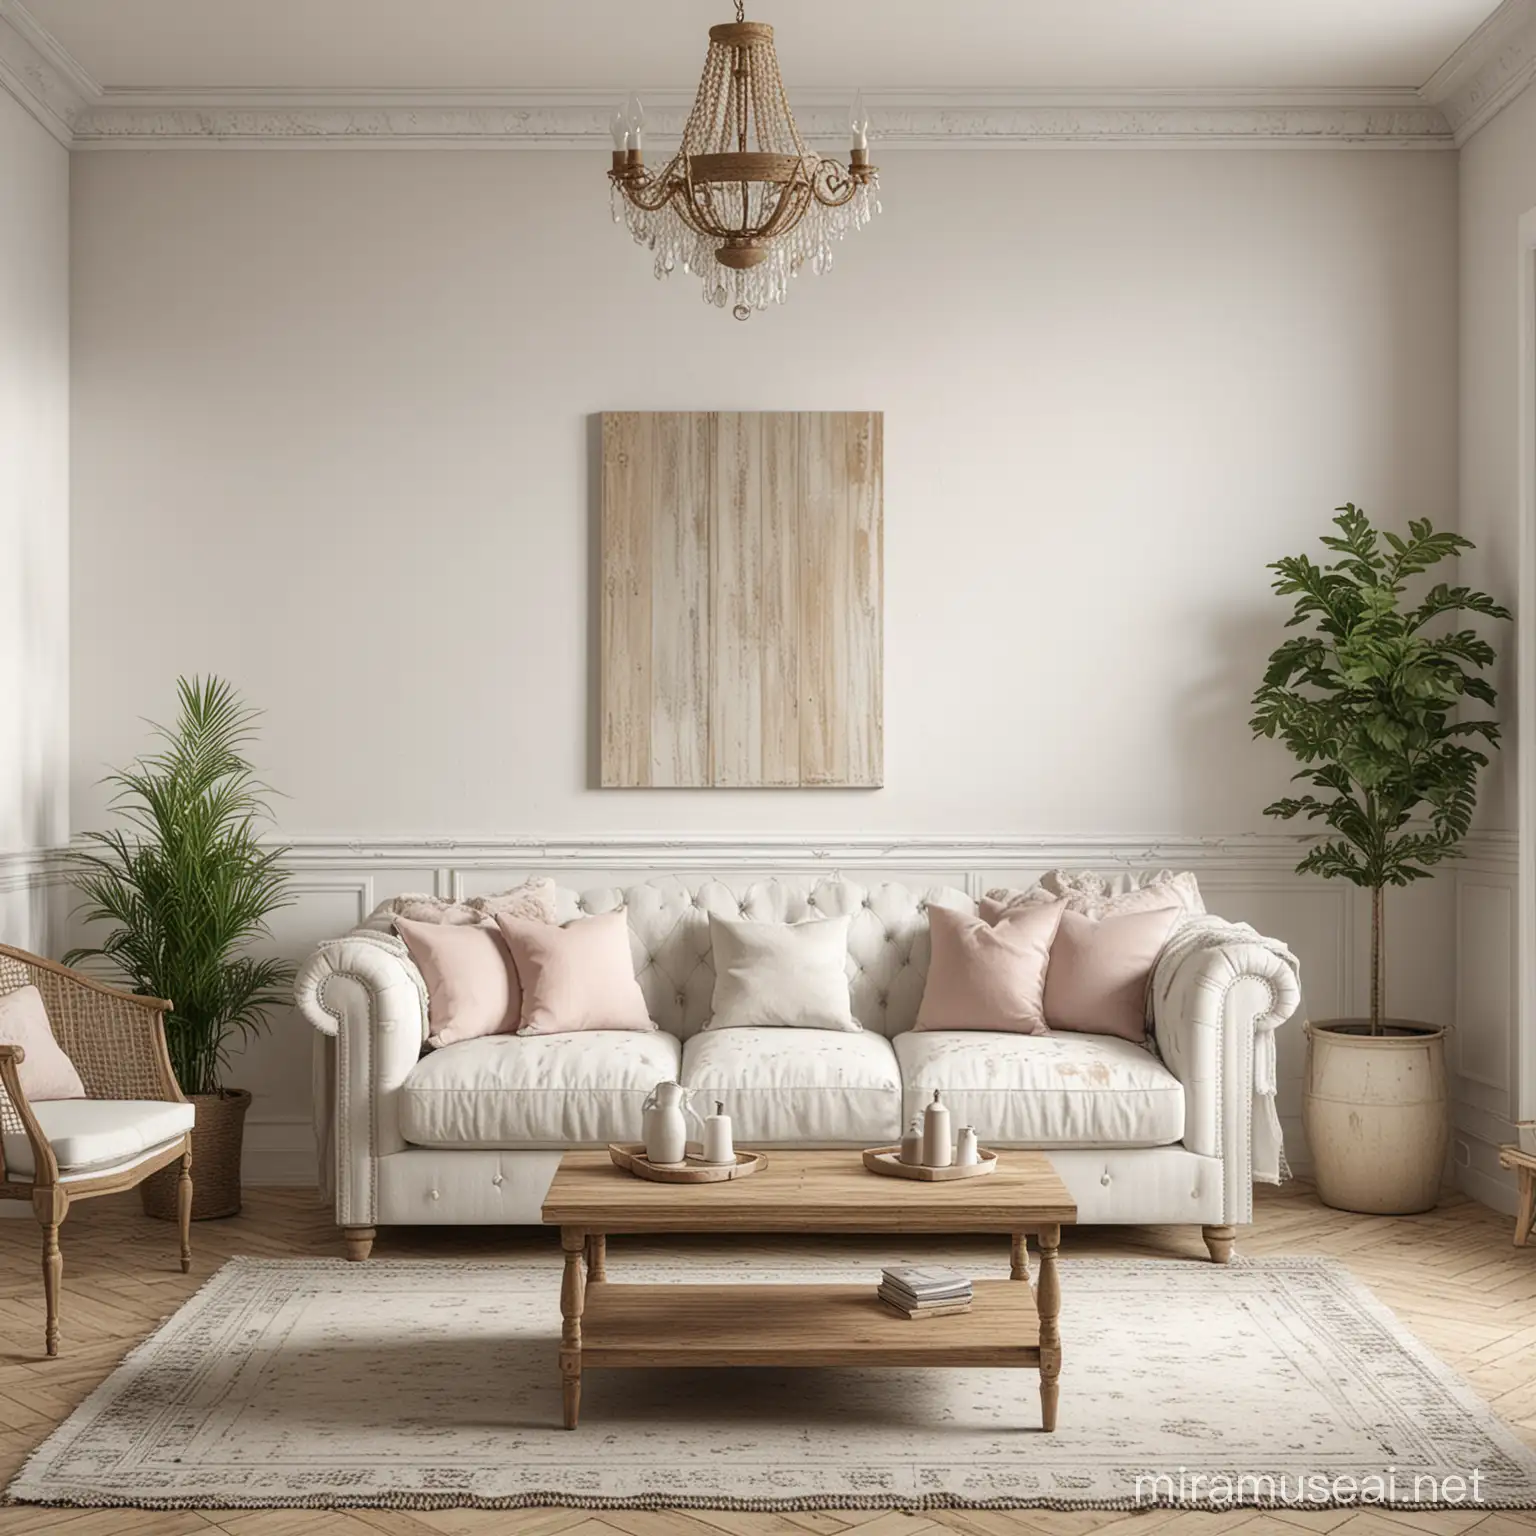 Cozy Shabby Chic Living Room Mockup with Vintage Accents